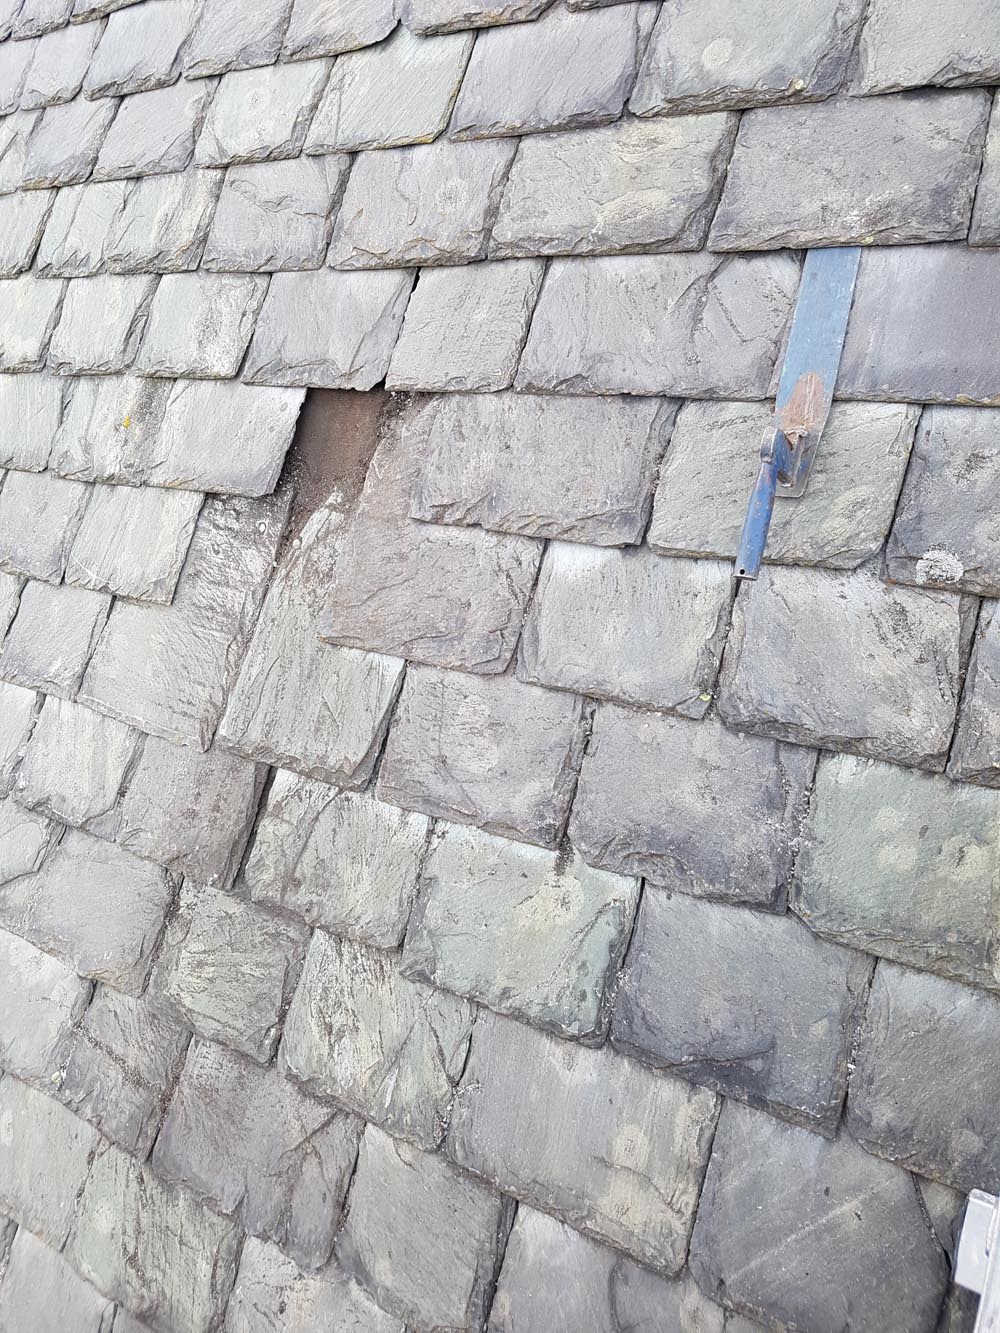 Slate patching